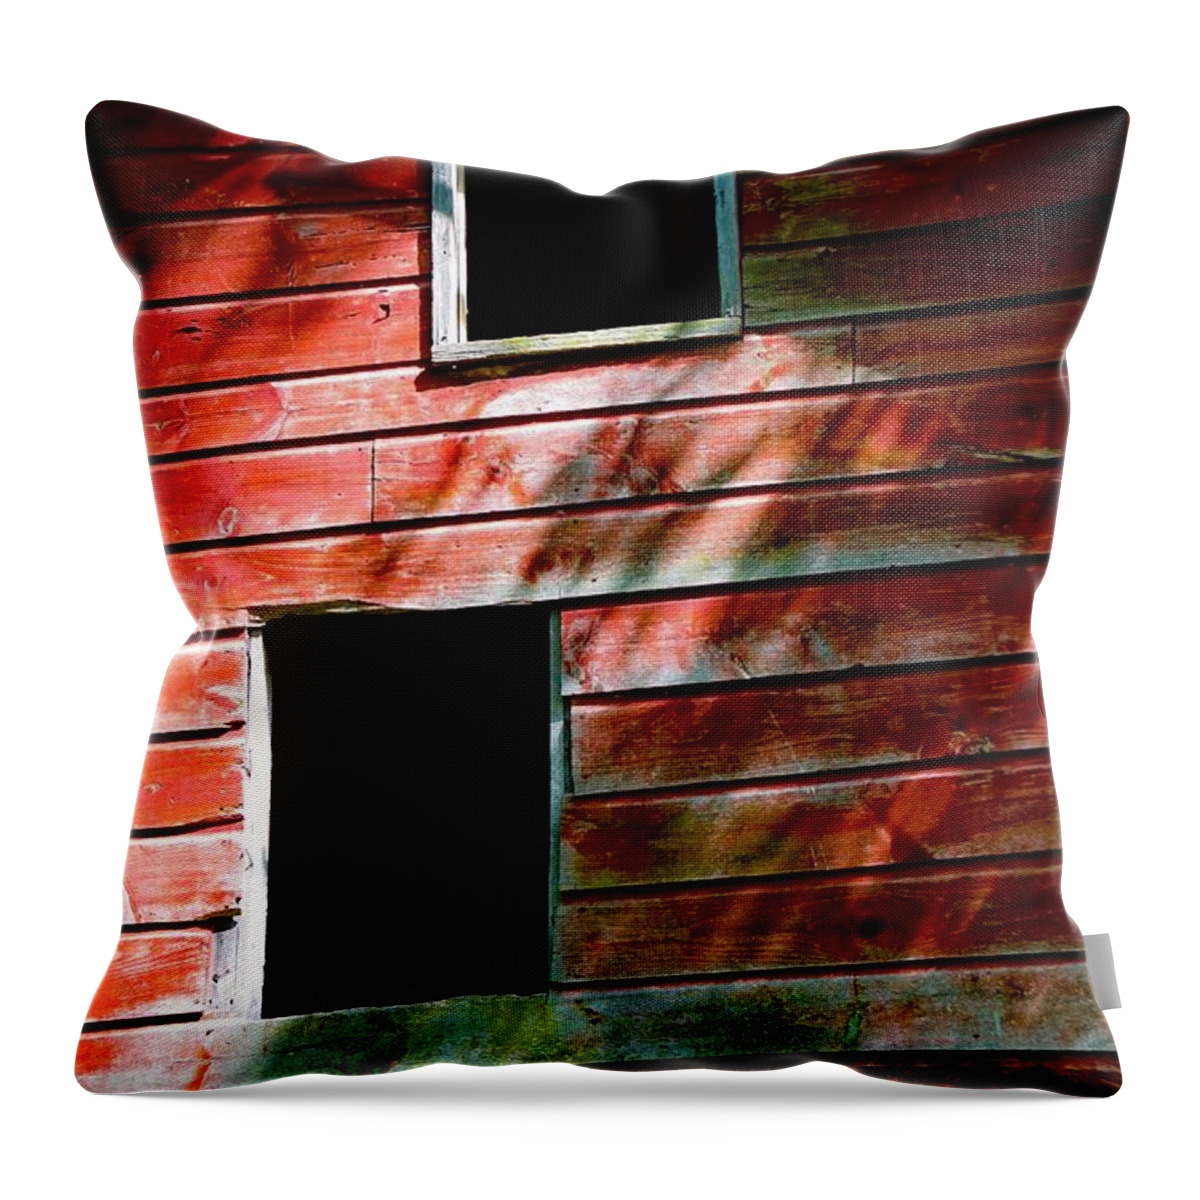  Throw Pillow featuring the photograph Barn Red by Kendall McKernon